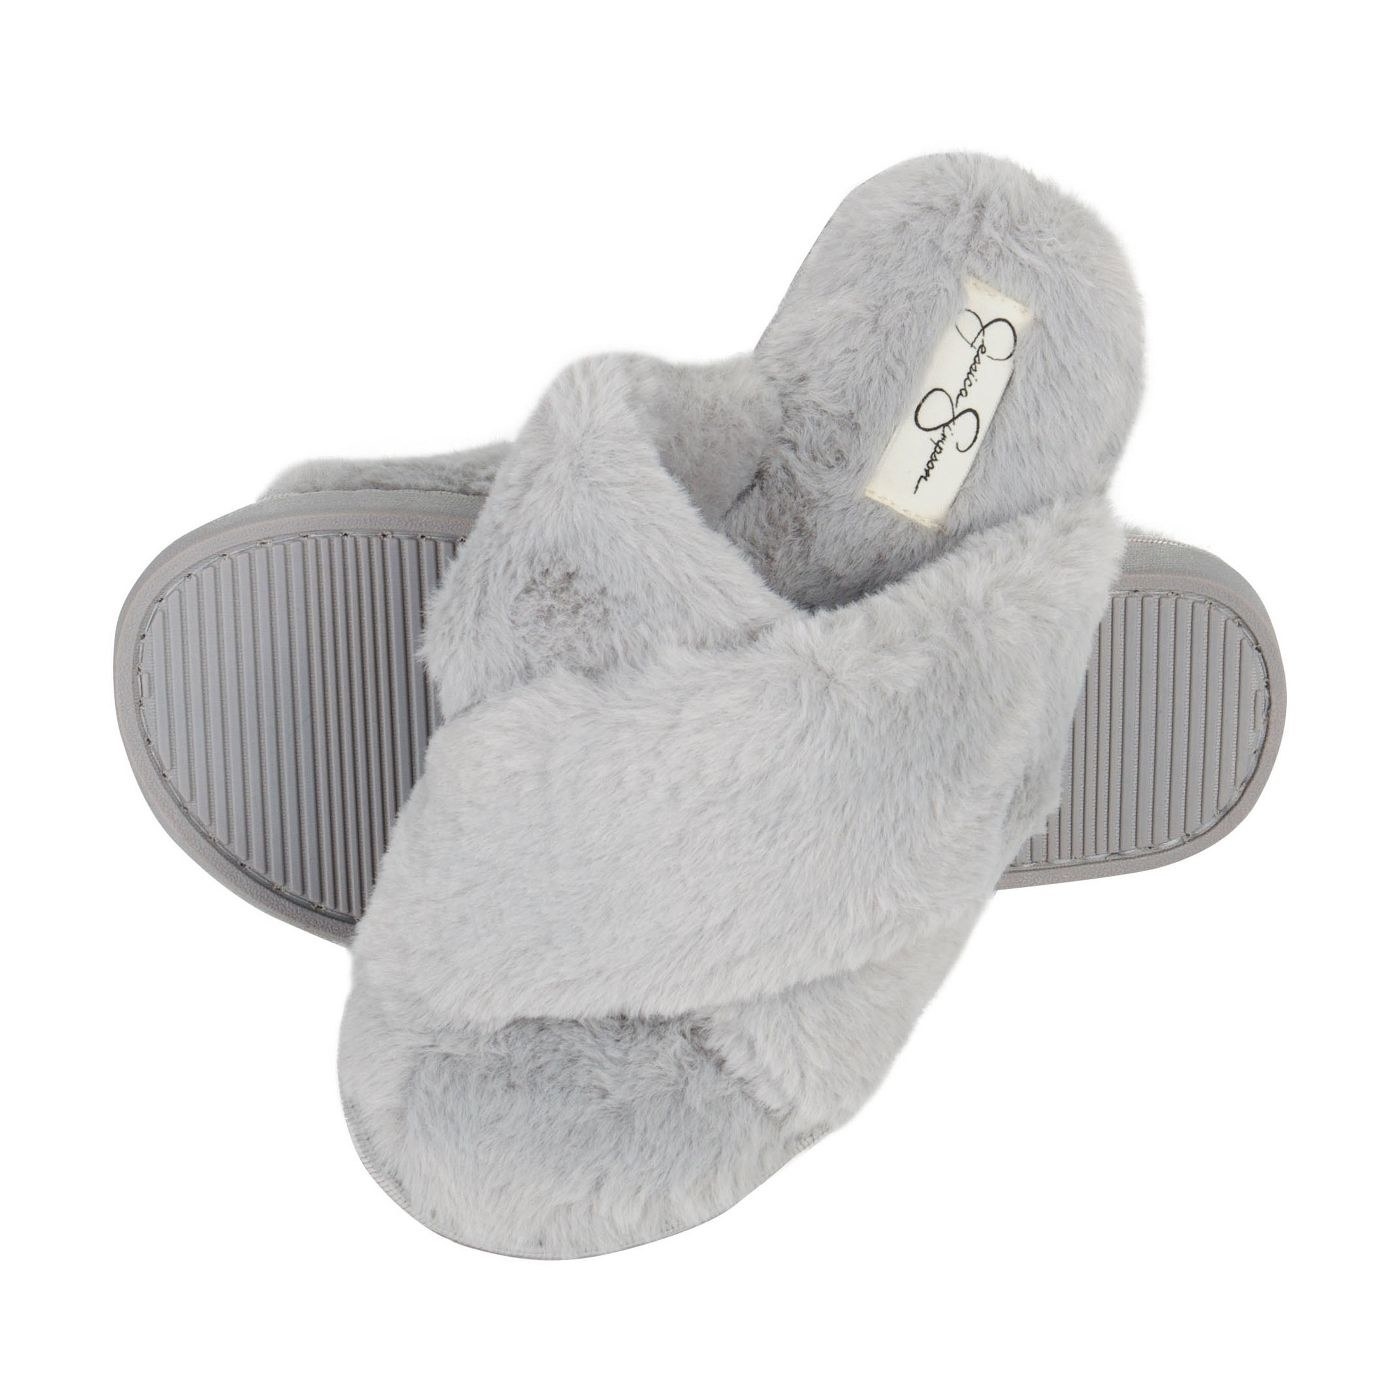 The grey pair of Jessica Simpson cross-band plush slide slippers